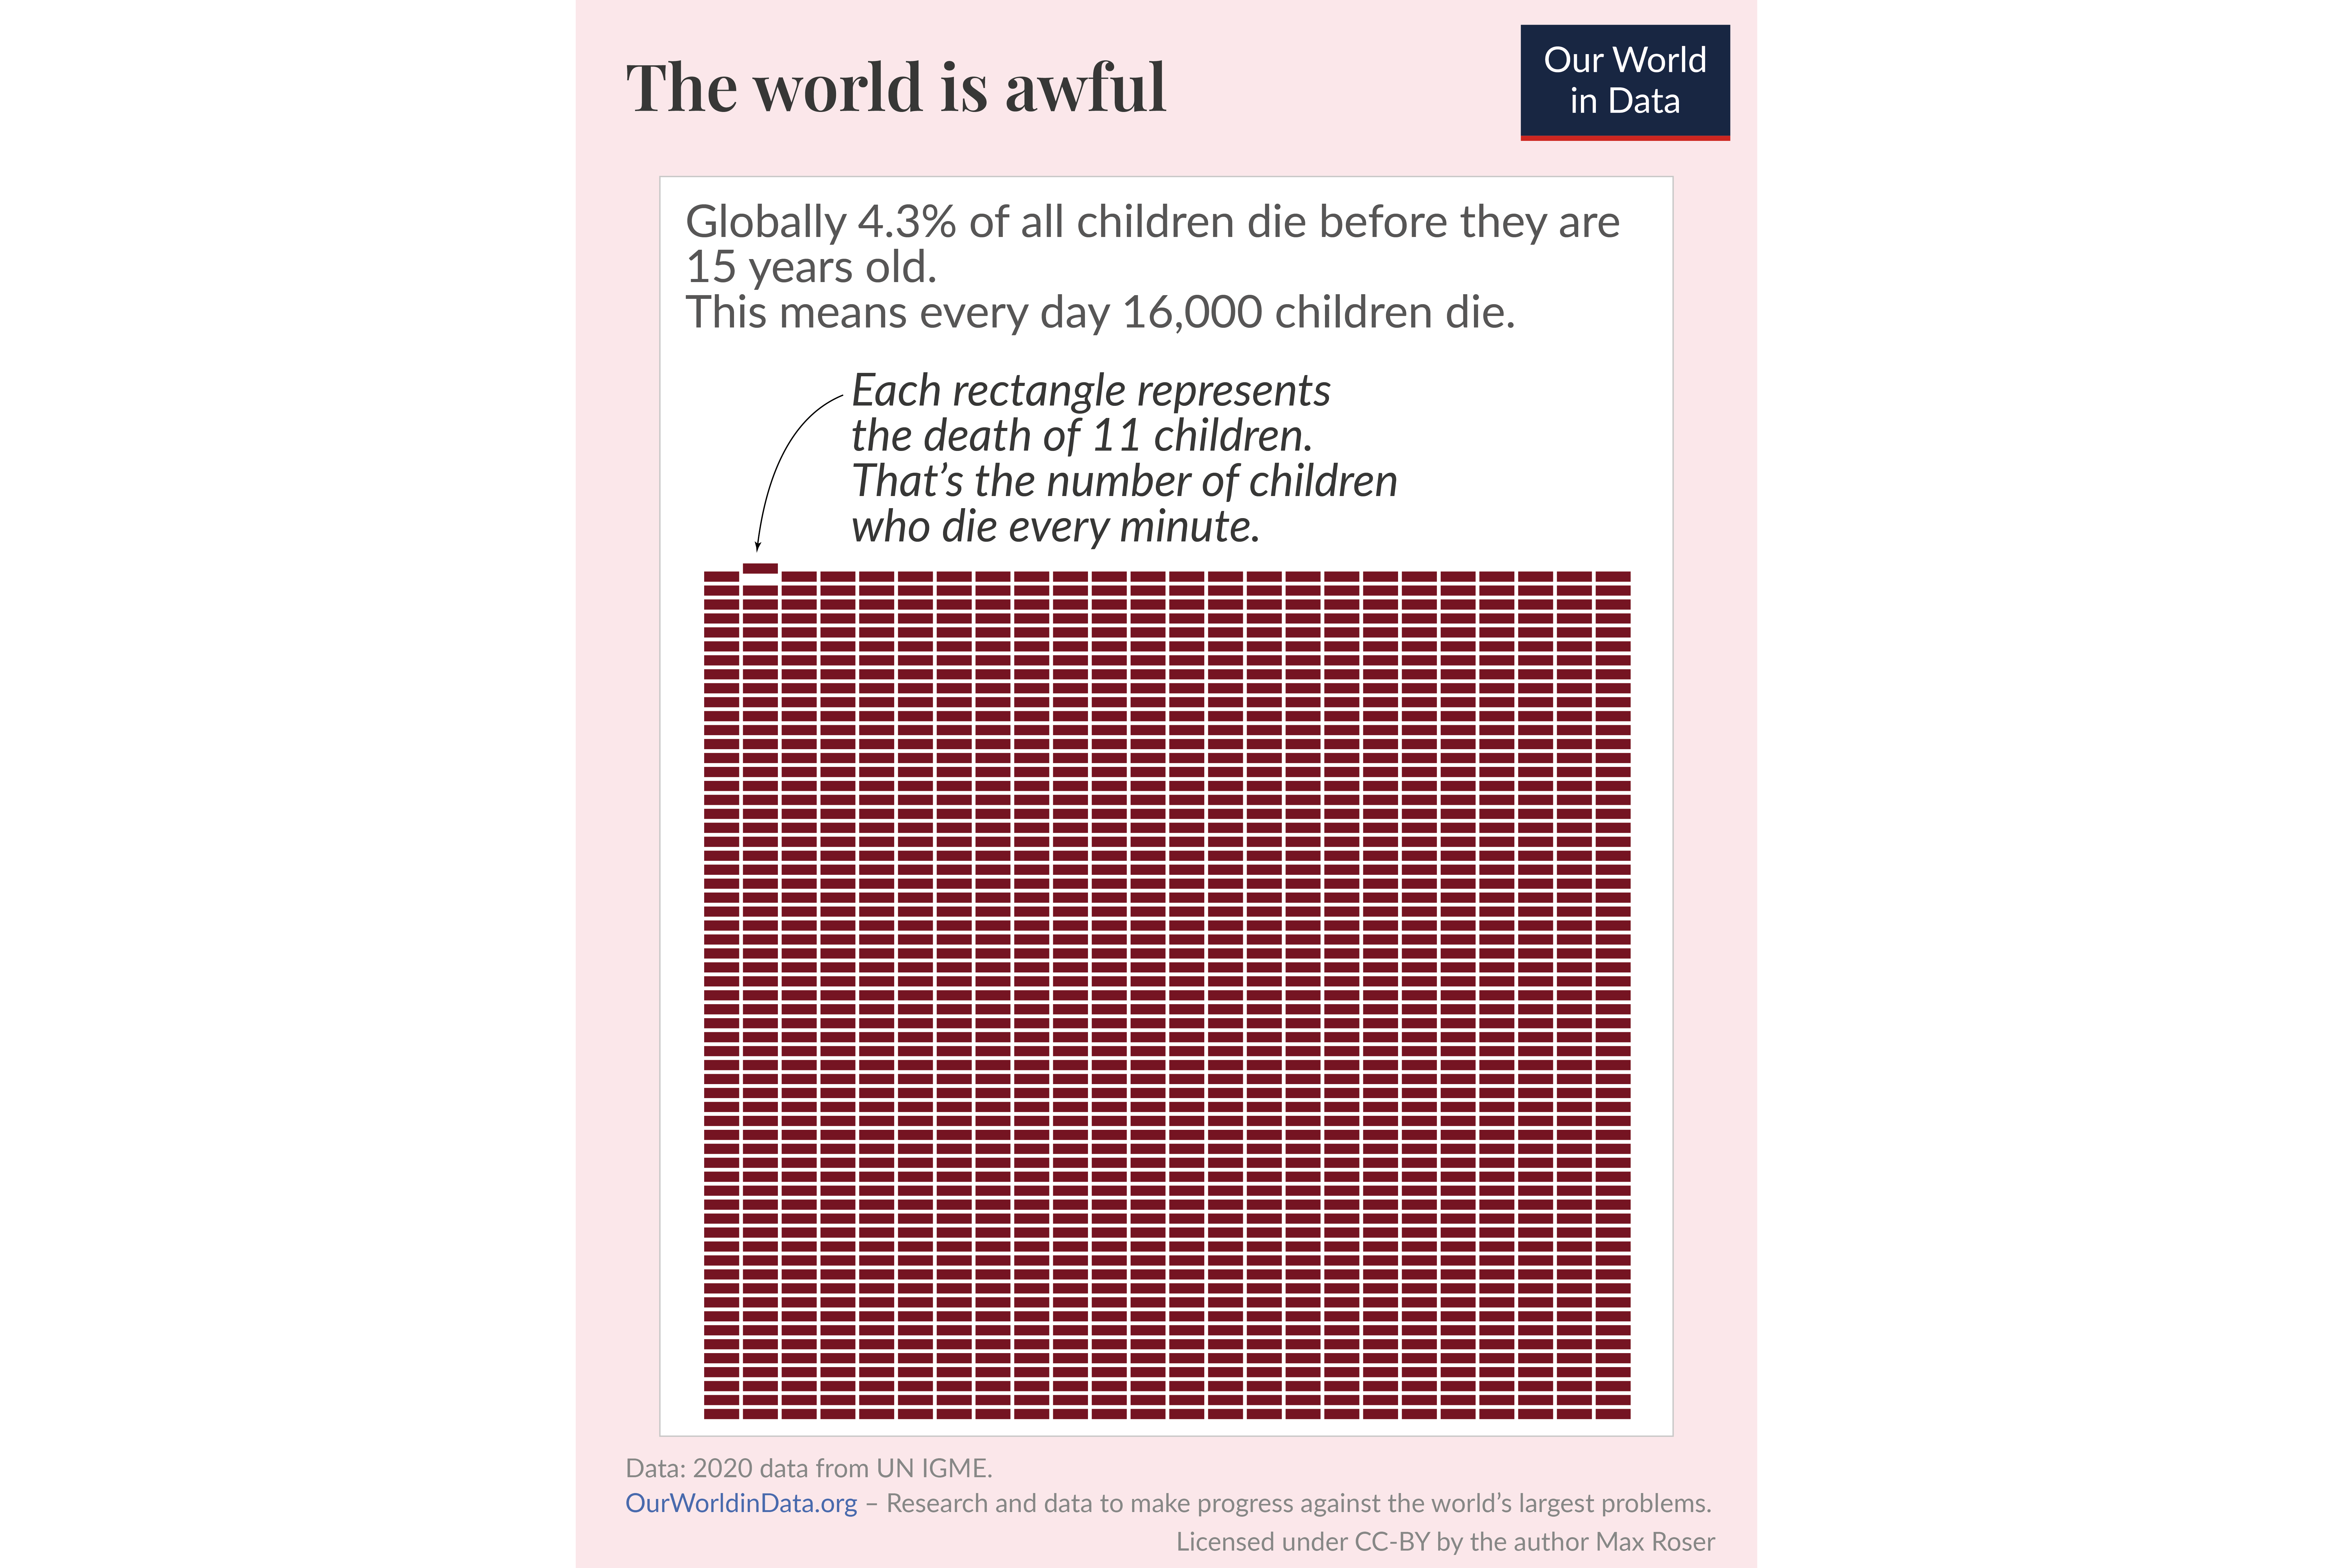 A chart showing that every day 16,000 children die